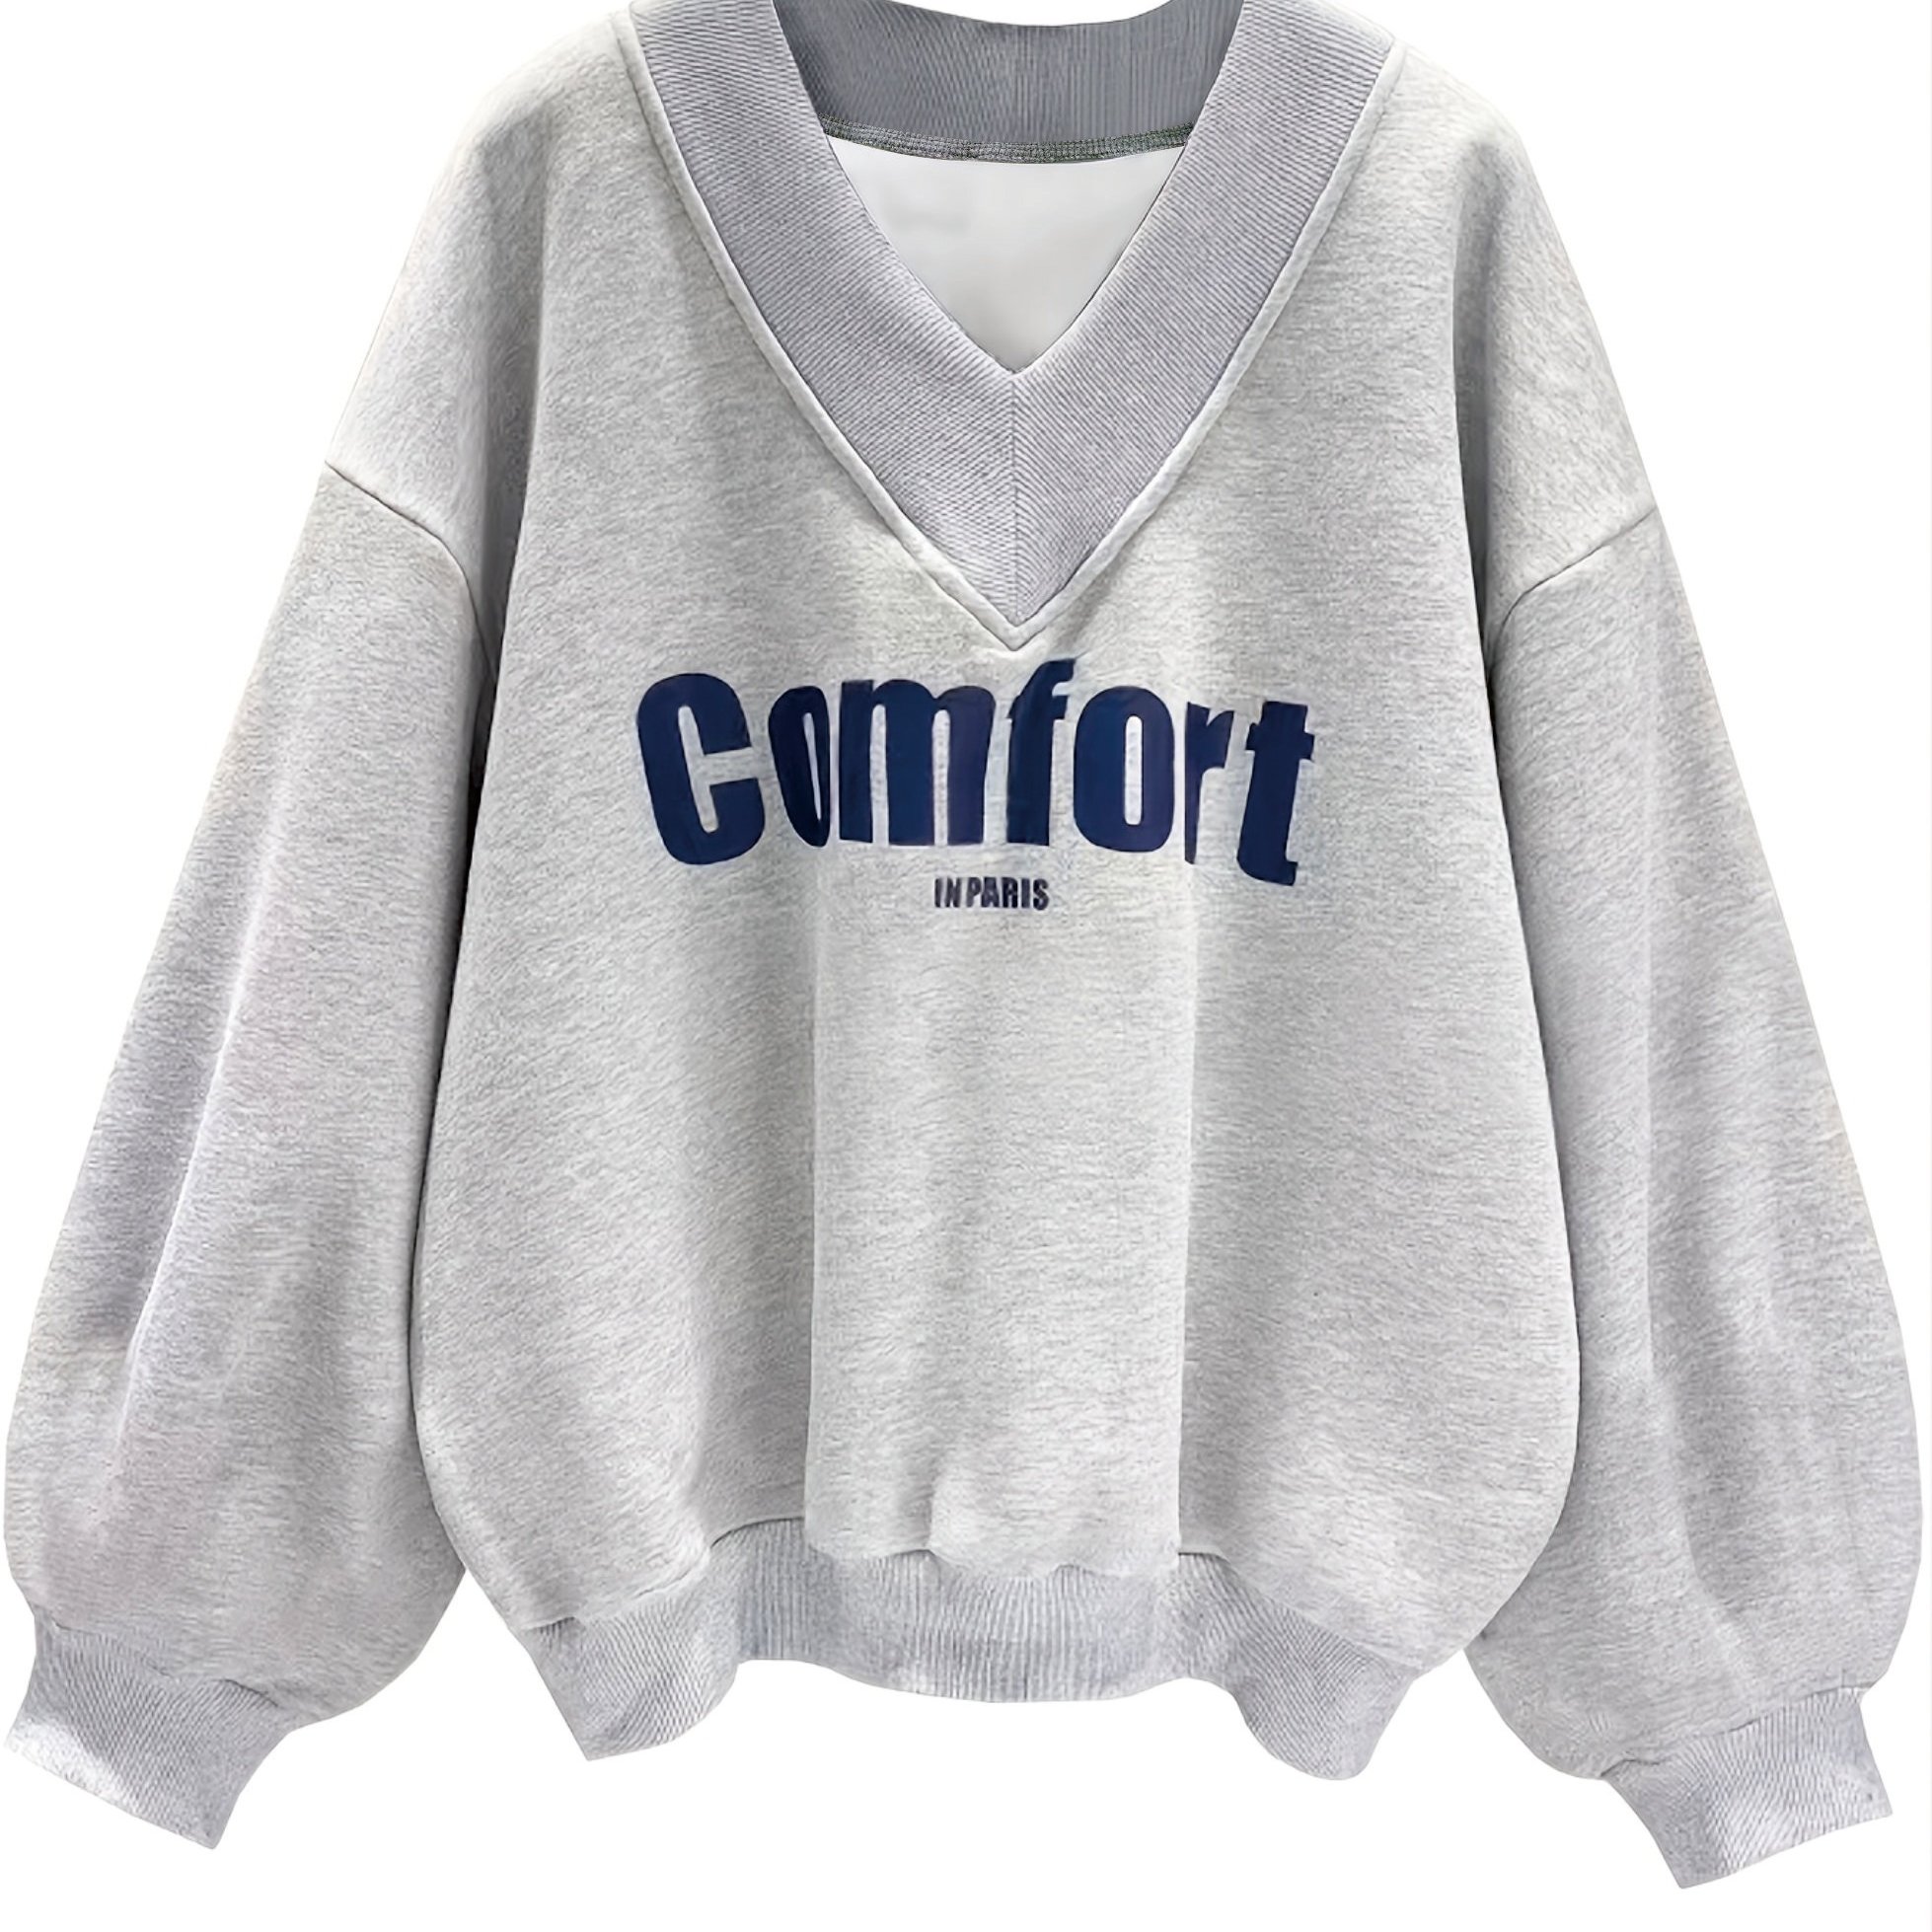 Letter Graphic Print Sweatshirt, Long Sleeve V Neck Pullover Sweatshirt,  Casual Tops For Fall & Winter, Women's Clothing